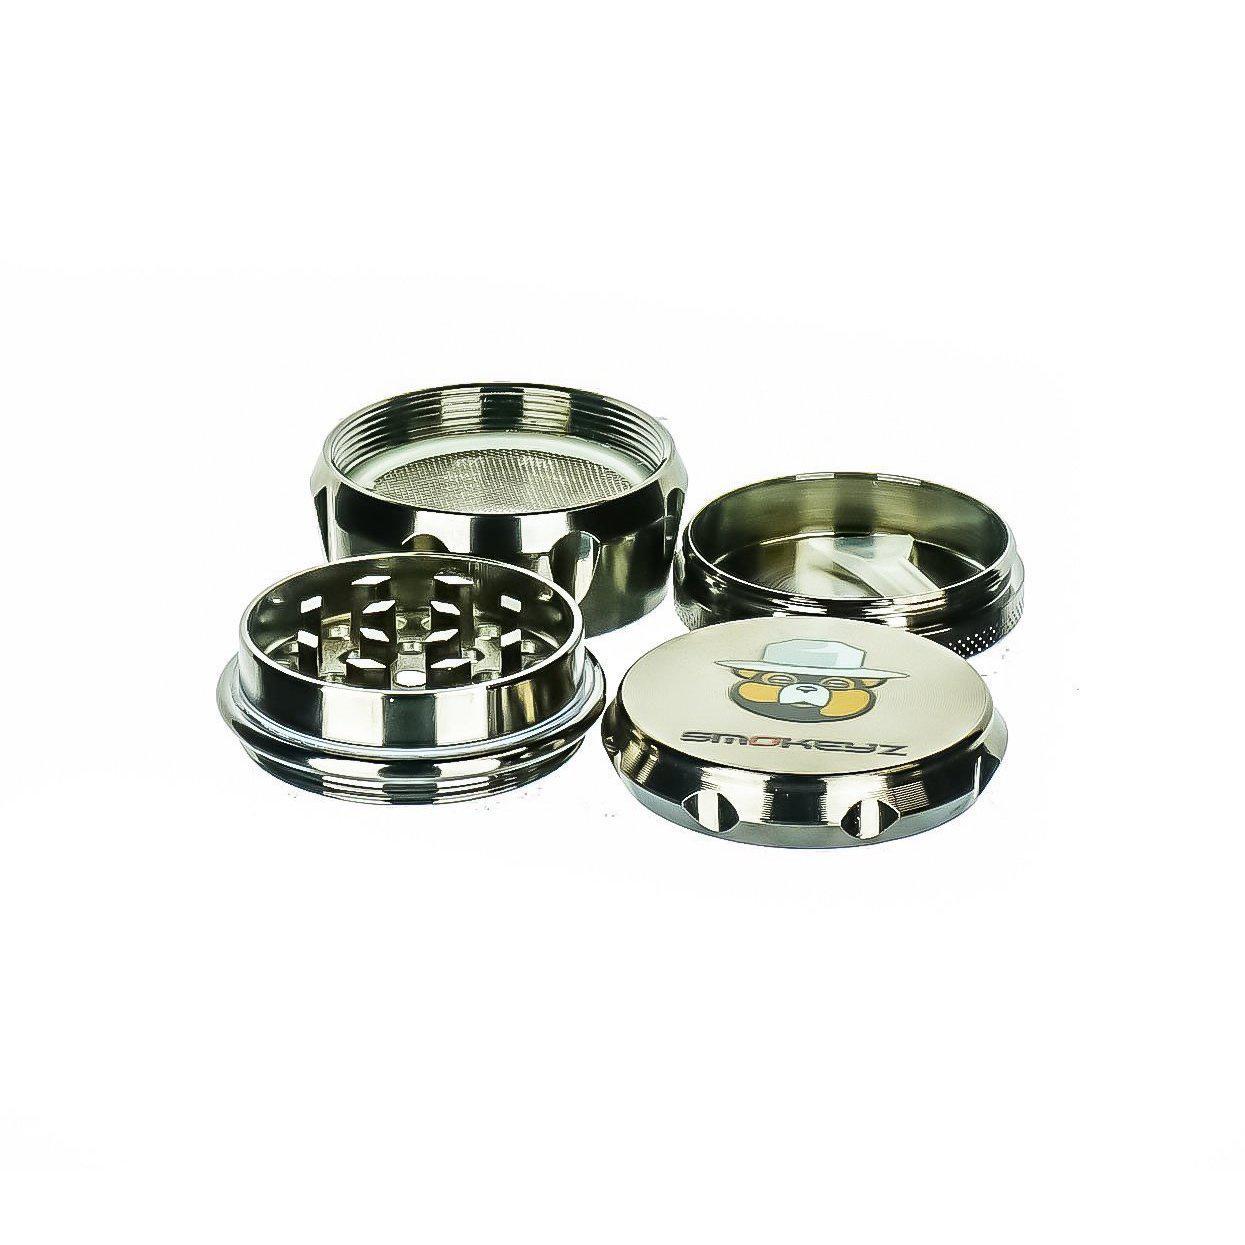 Smokeyz 4 Piece Magnetic Metal Grinder - 3 Sizes Flower Power Packages 